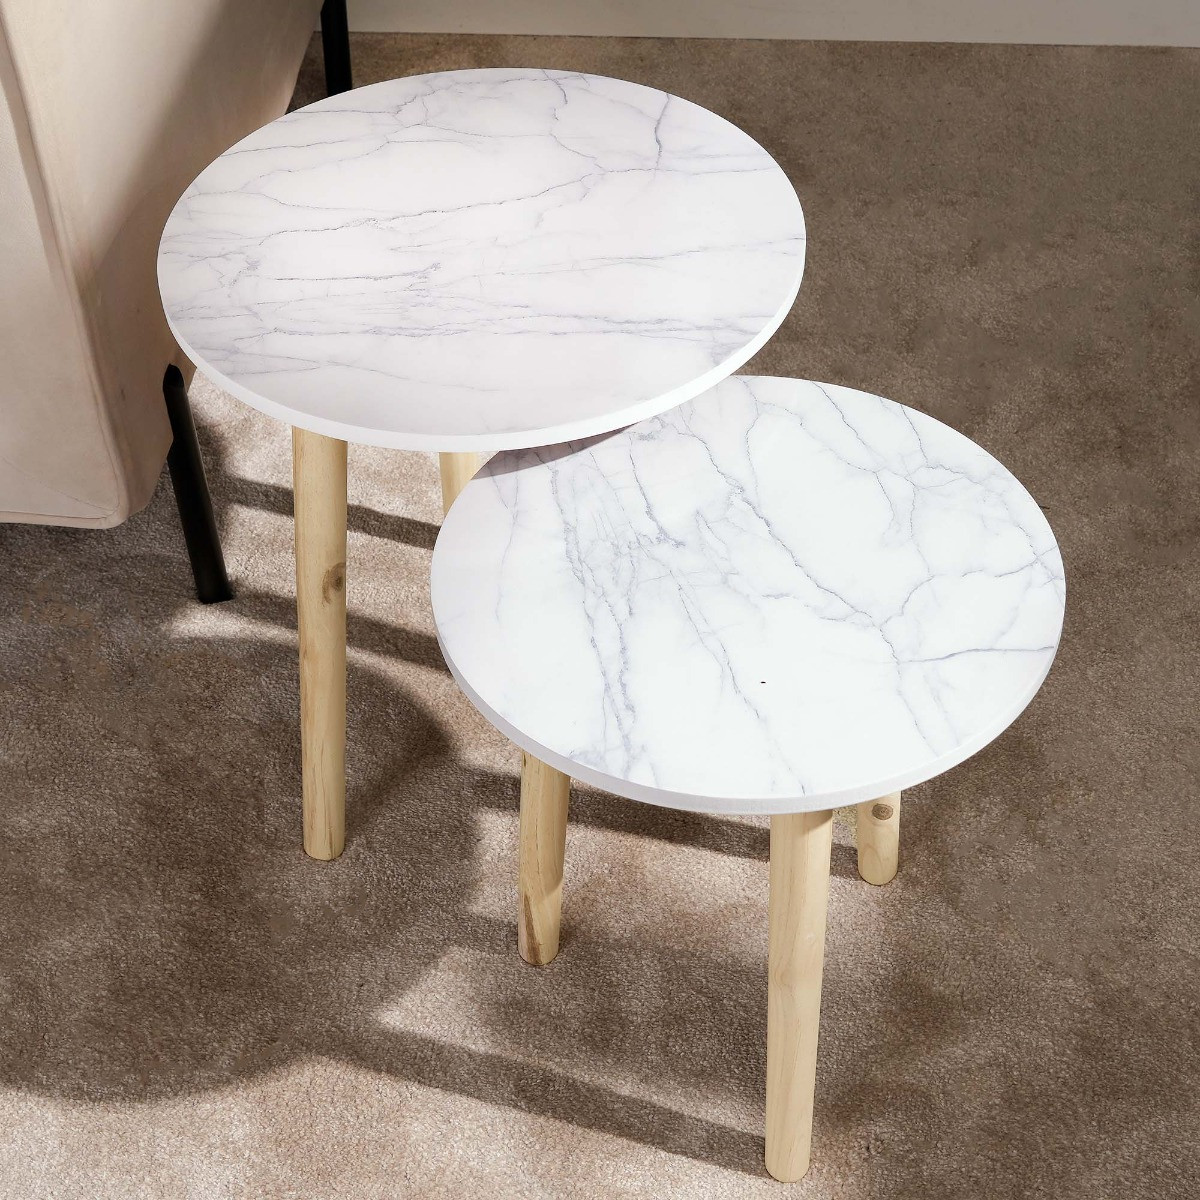 OHS Set Of 2 Marble Round Tables - White>